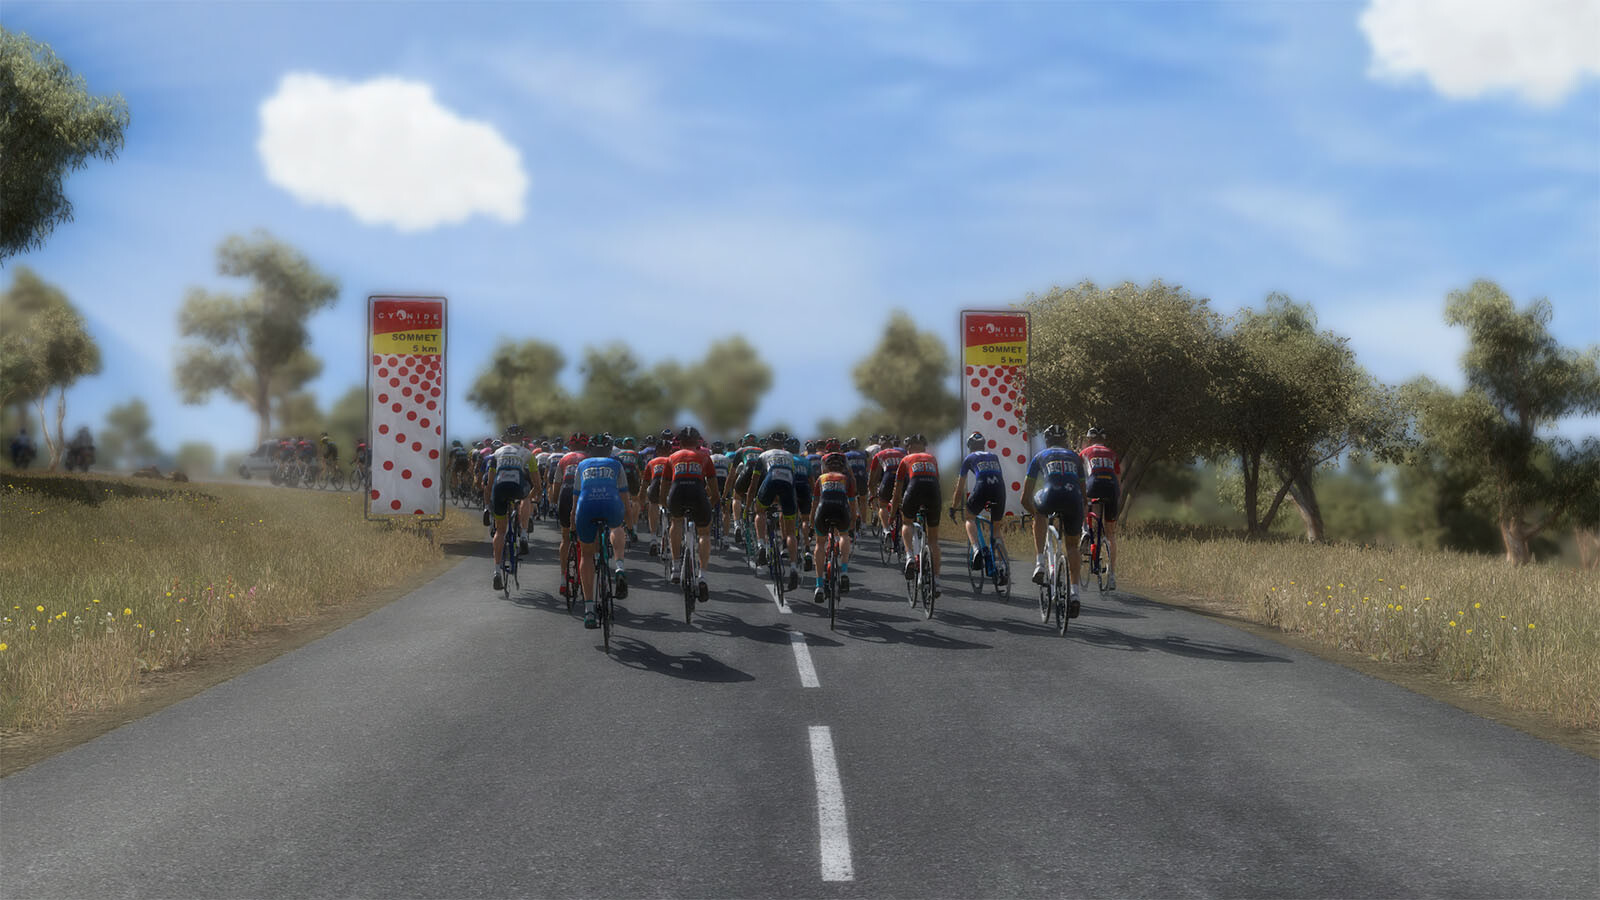 Buy Pro Cycling Manager 2022 (PC) - Steam Key - GLOBAL - Cheap - !